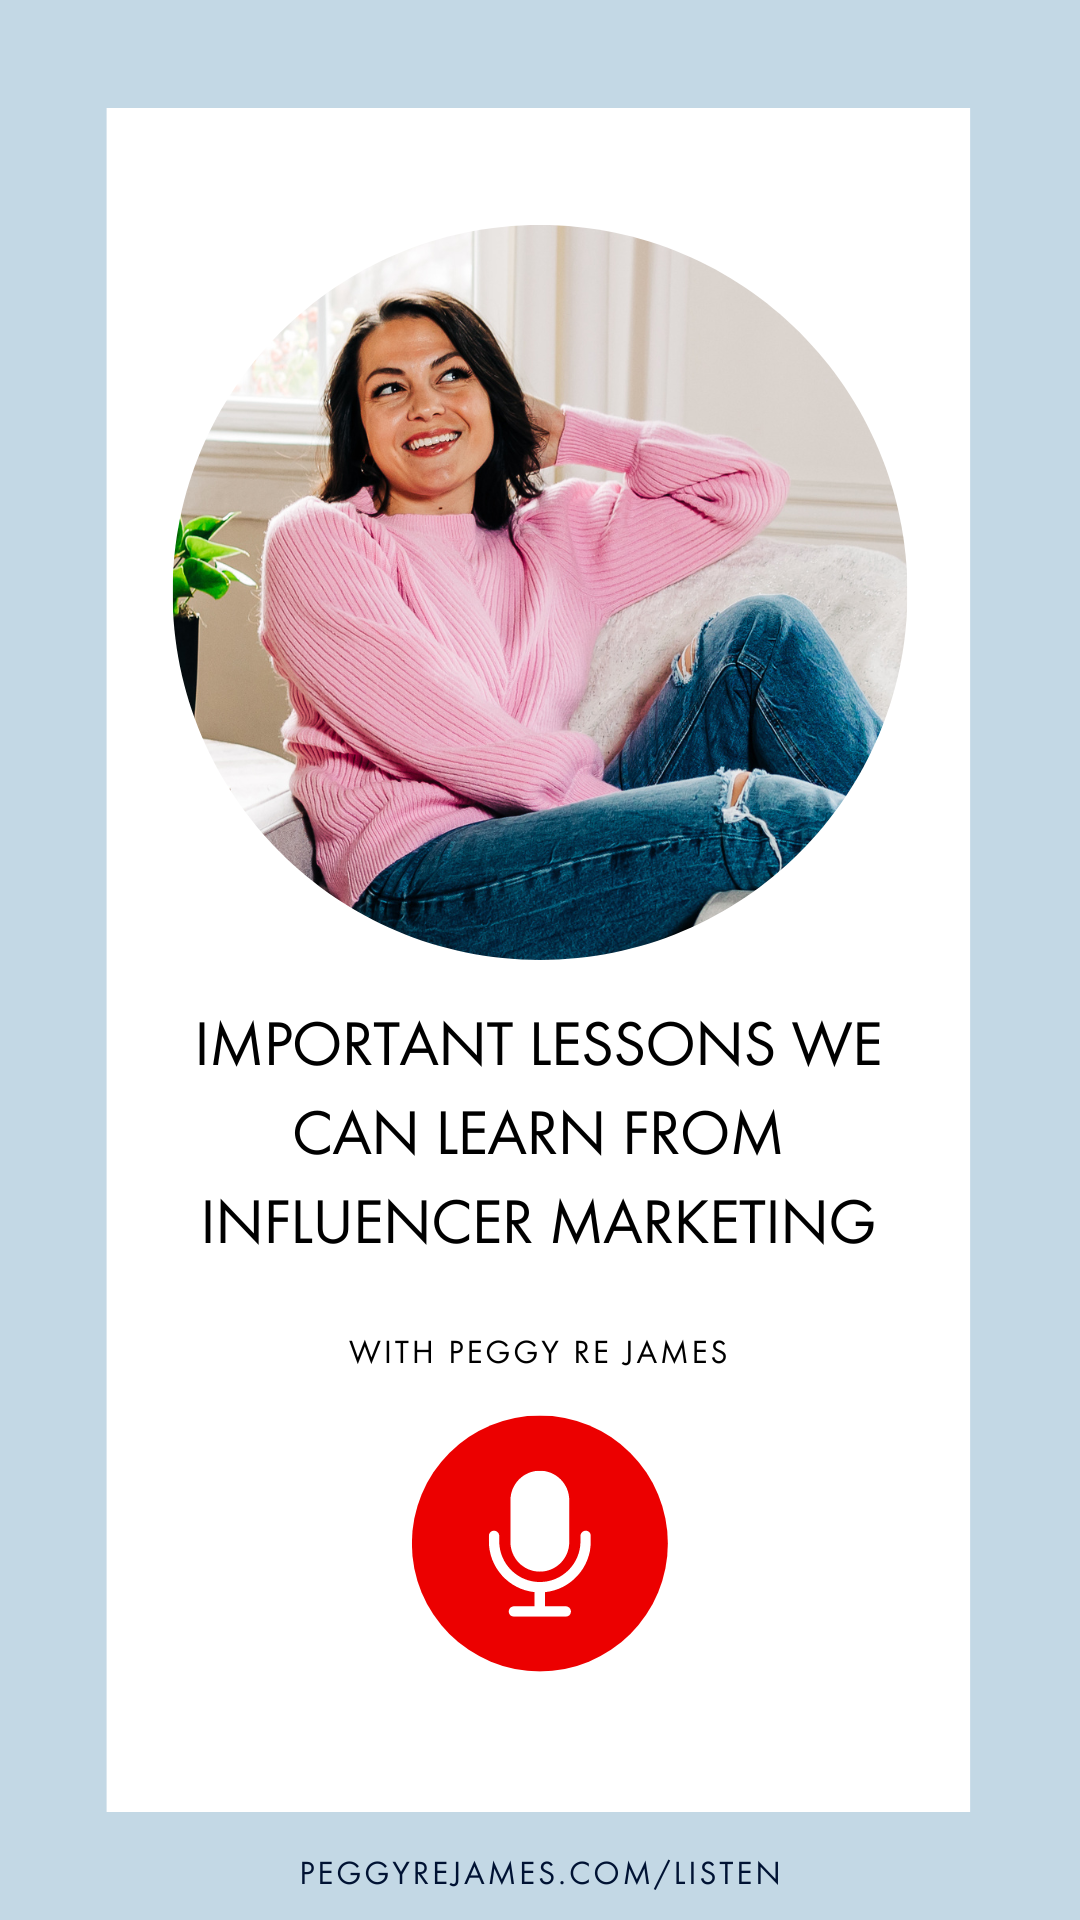 Important lessons we can learn from influencer marketing